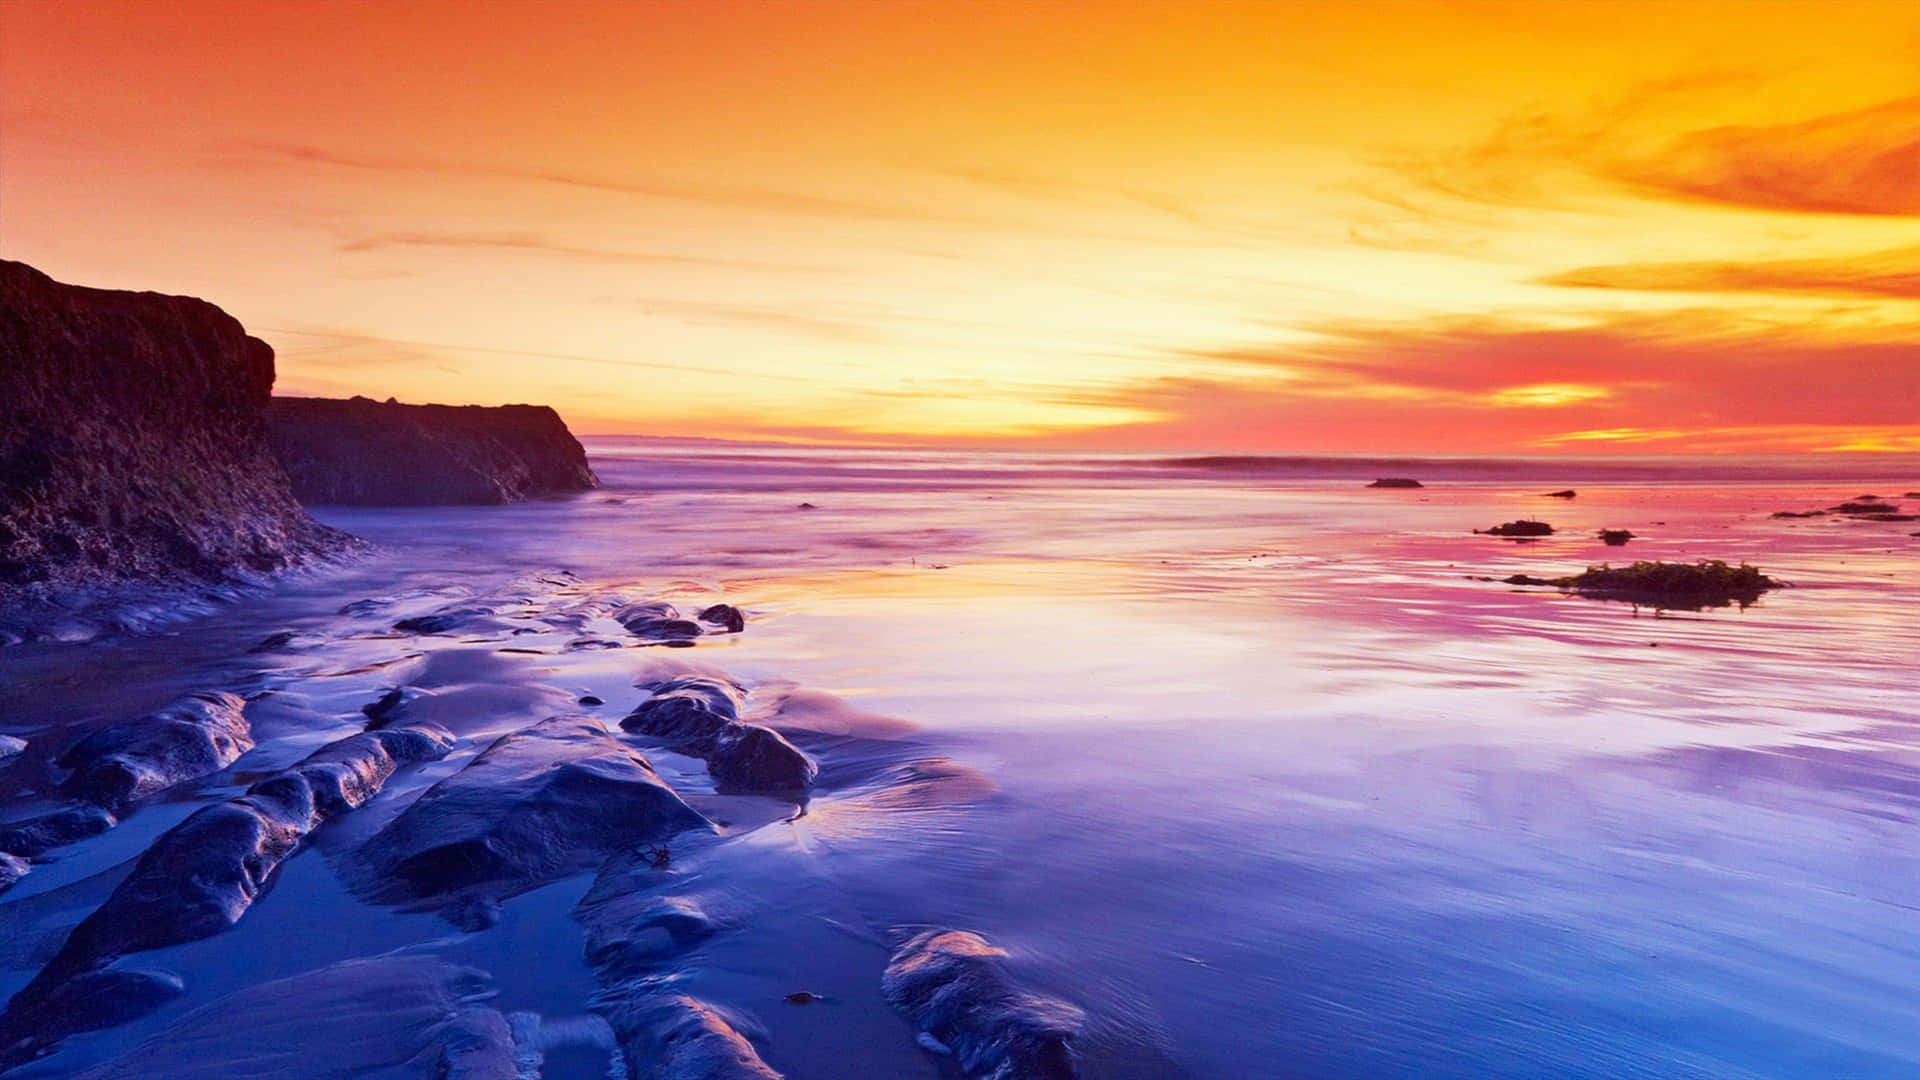 A Colorful Sunset Over The Ocean And Rocks Wallpaper